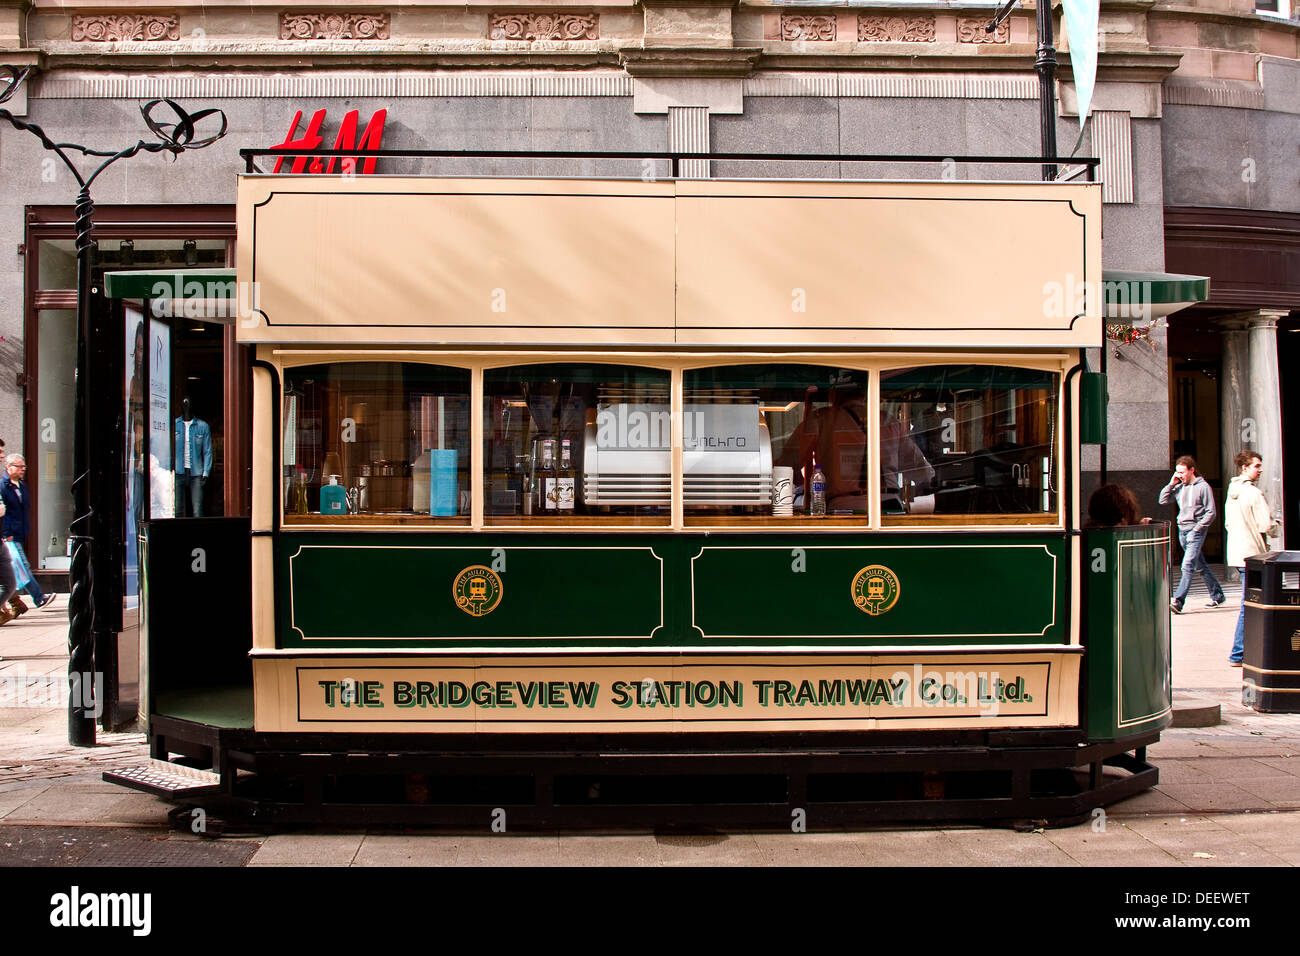 Bridgeview Station Tramway Co. Ltd Tram car outside the H&M retail store is a small cafe catering for the people in Dundee, UK Stock Photo